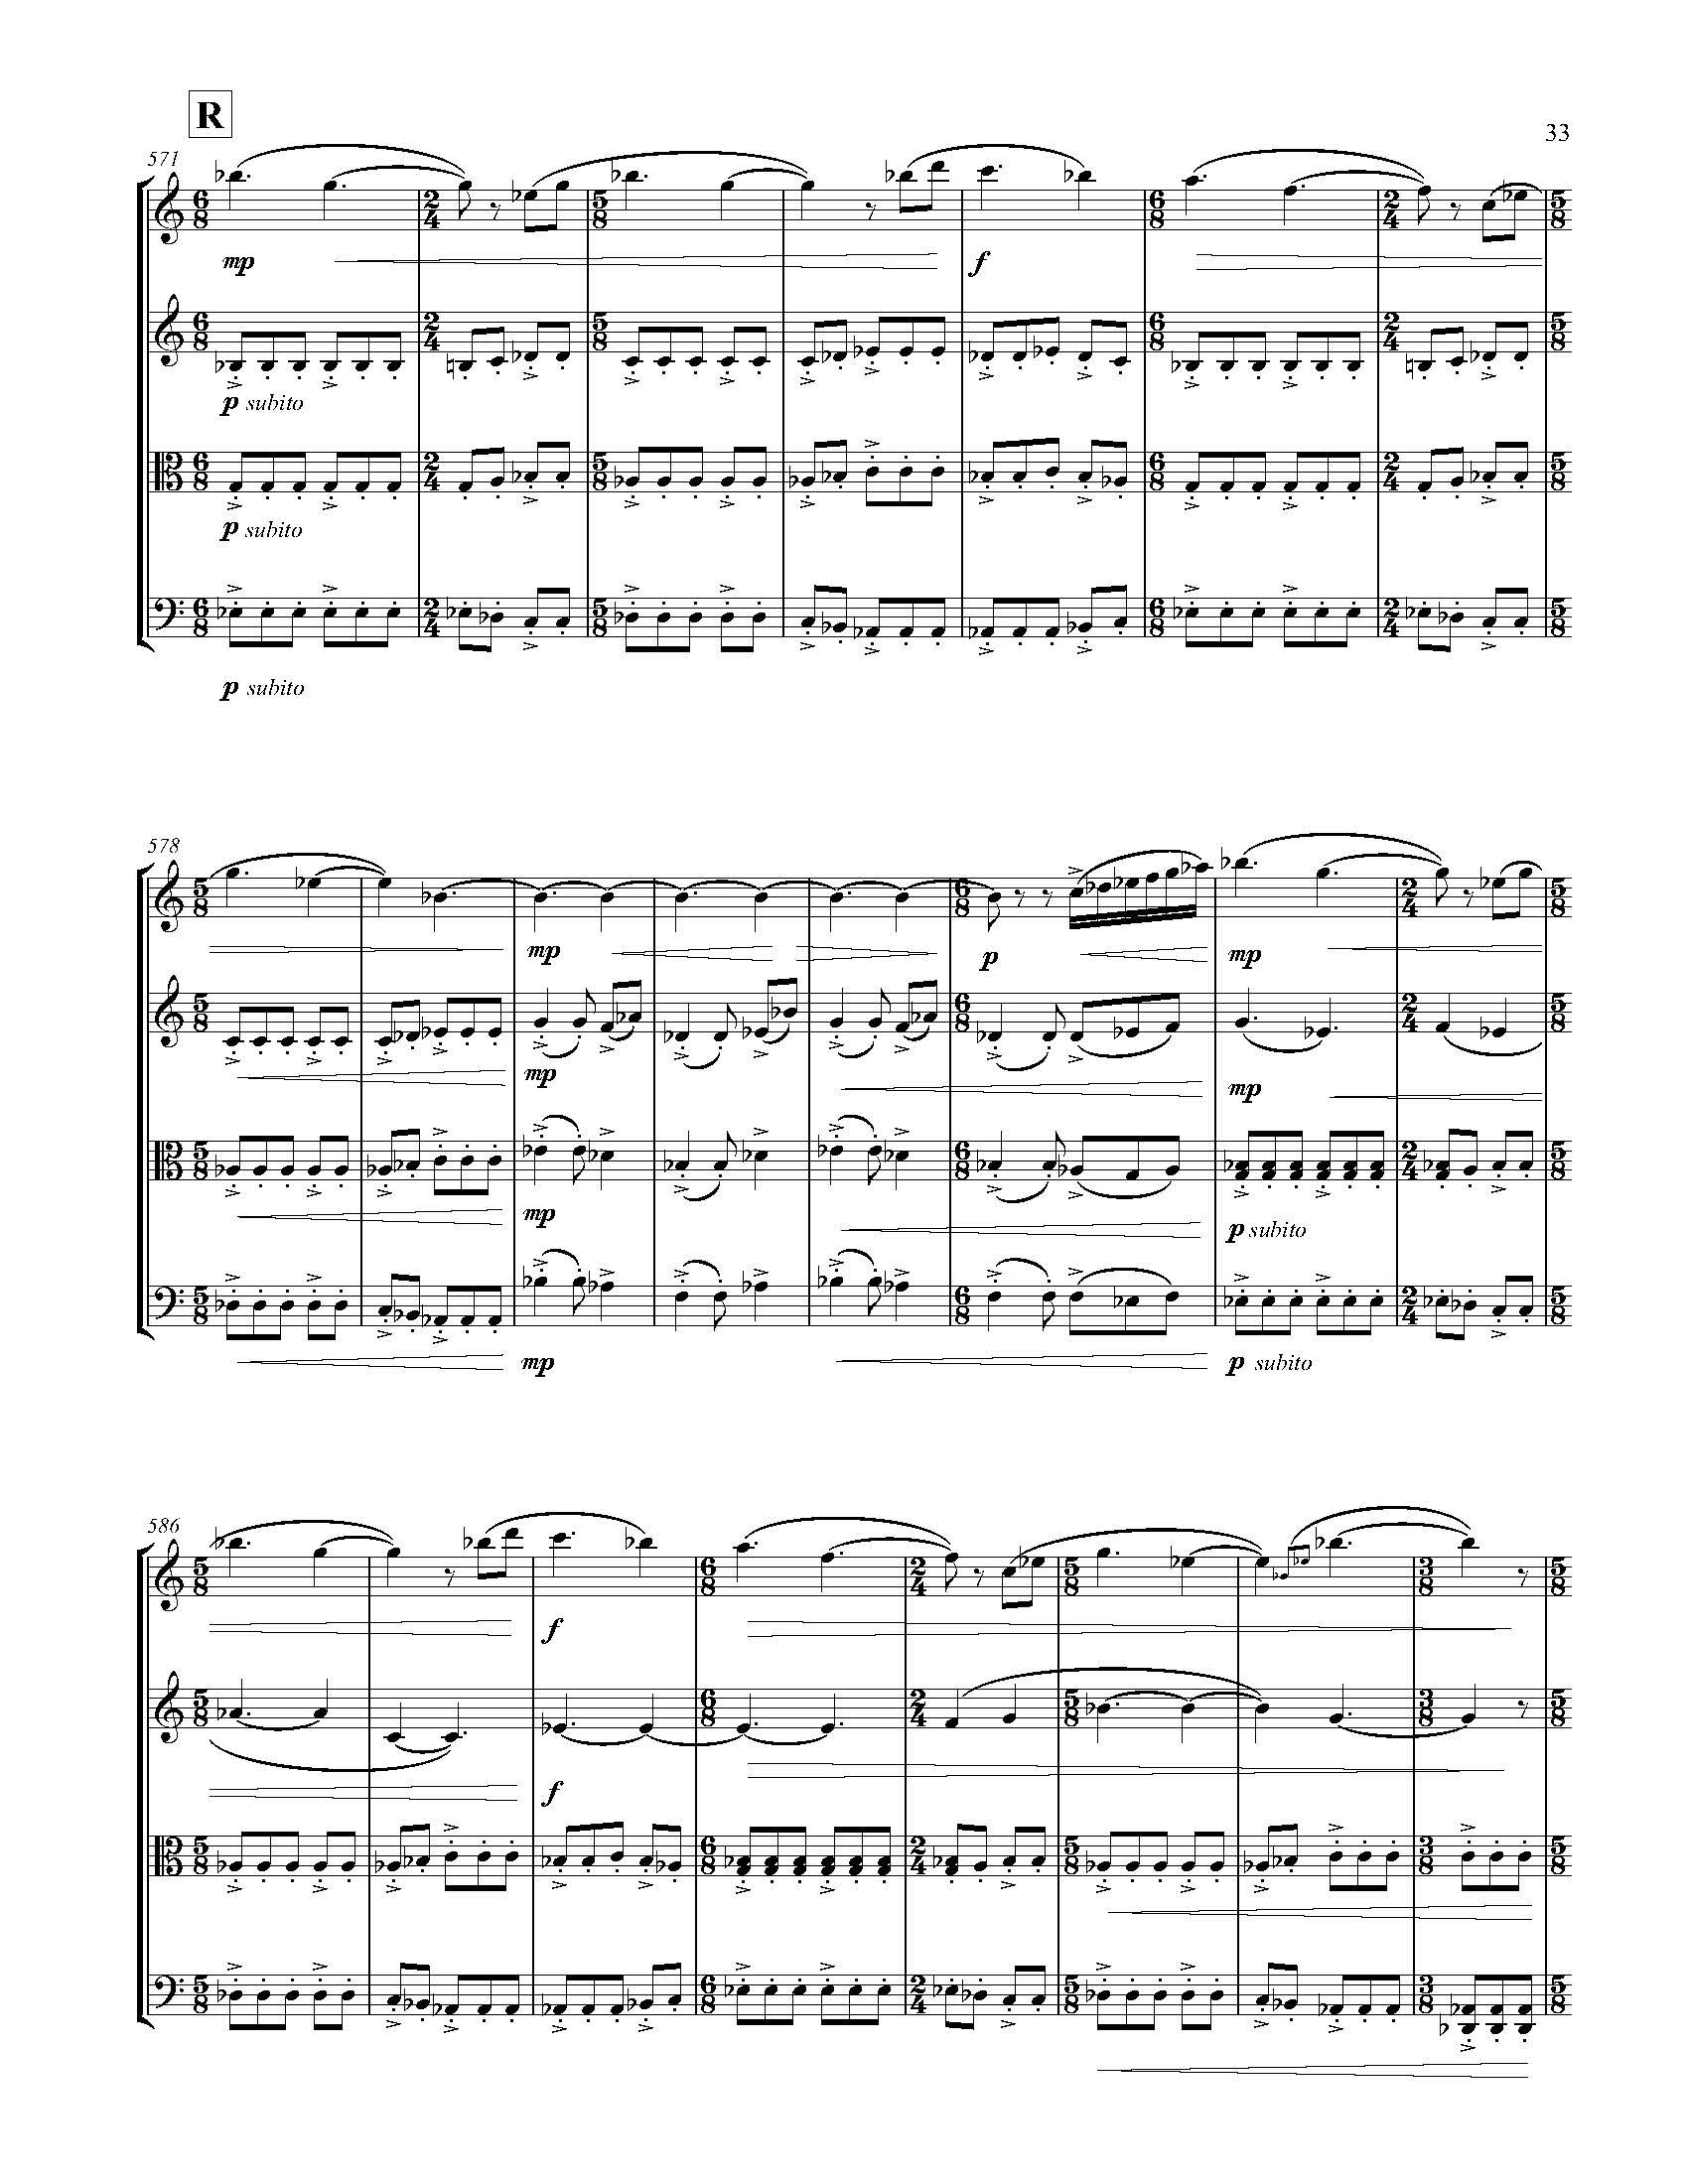 A Country of Vast Designs - Complete Score_Page_39.jpg